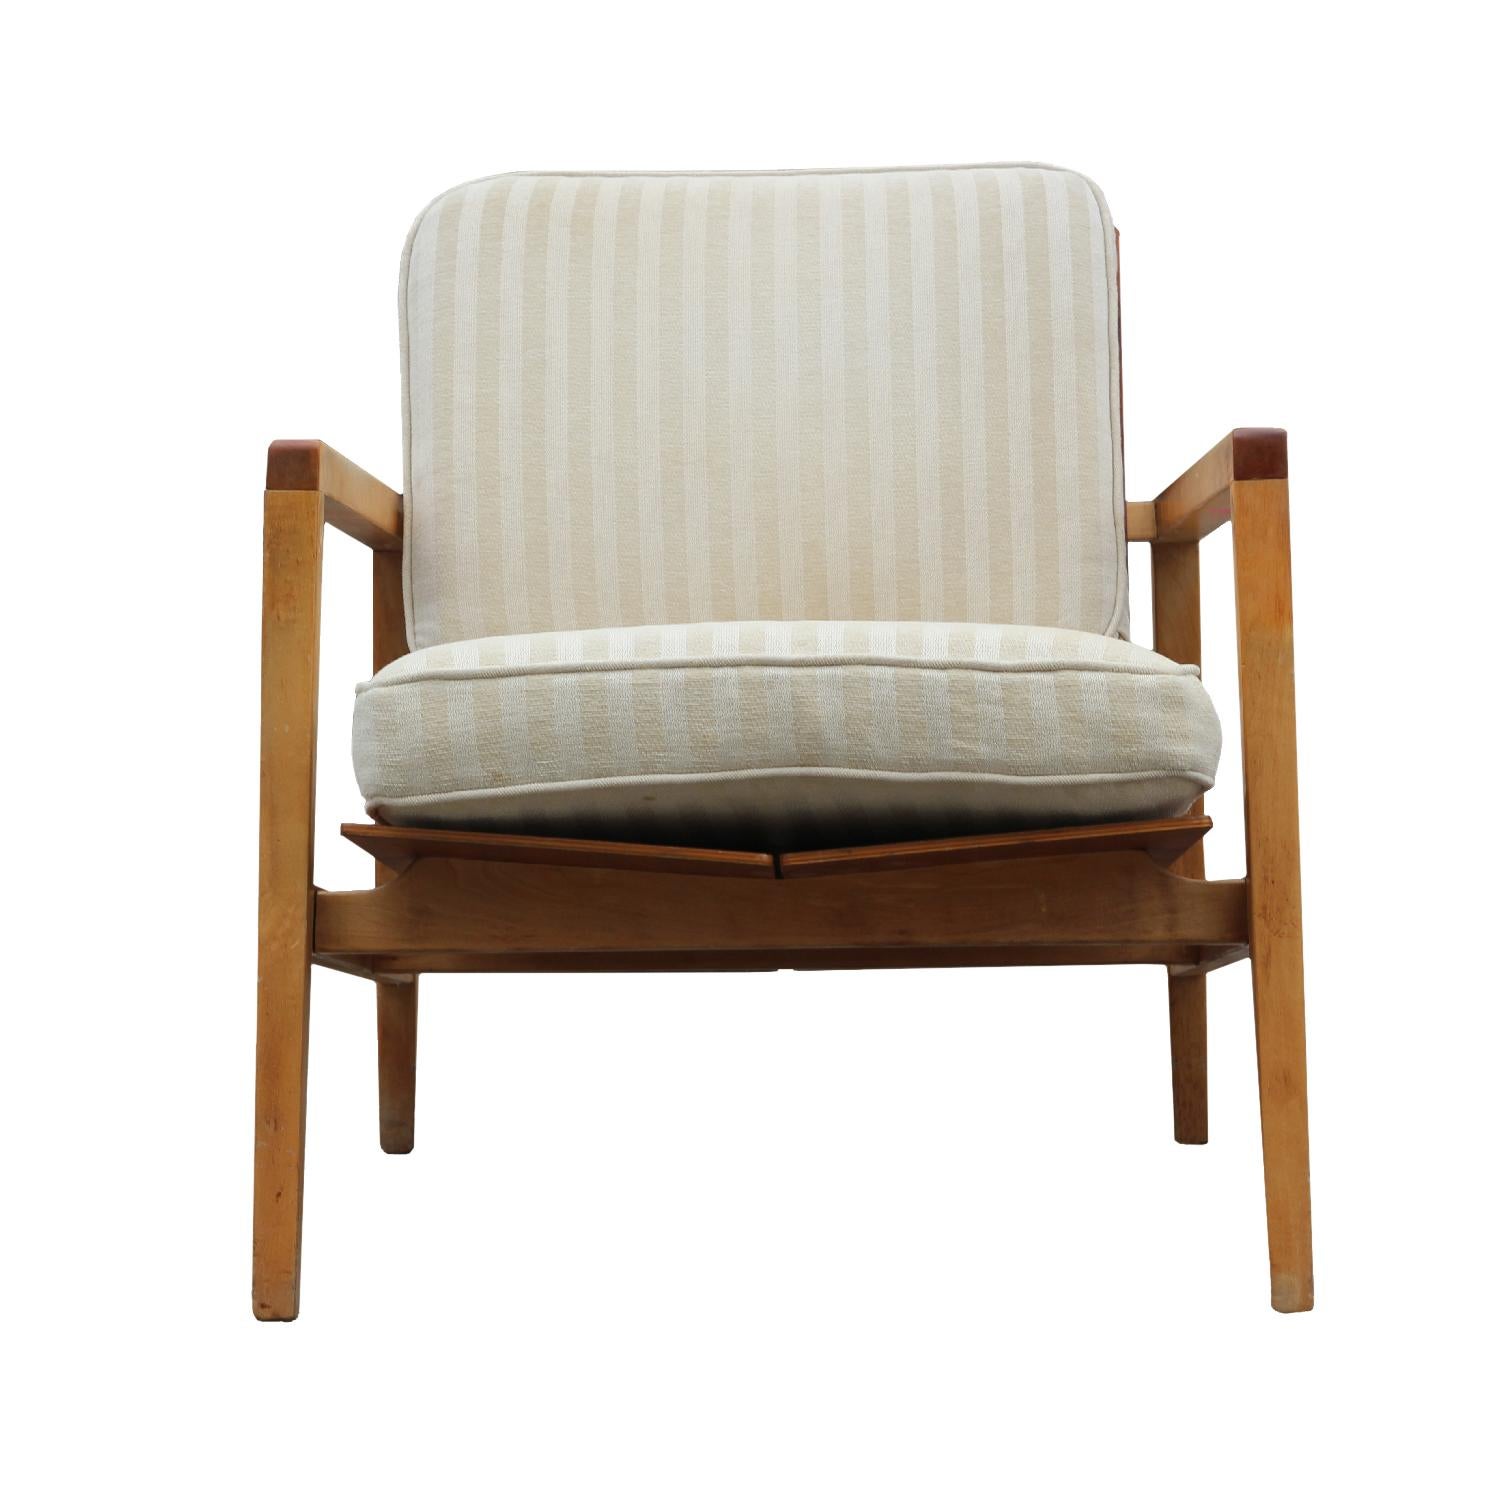 Mid-Century Modern Pair of Modern Lewis Butler for Knoll Lounge Chairs Model No. 655